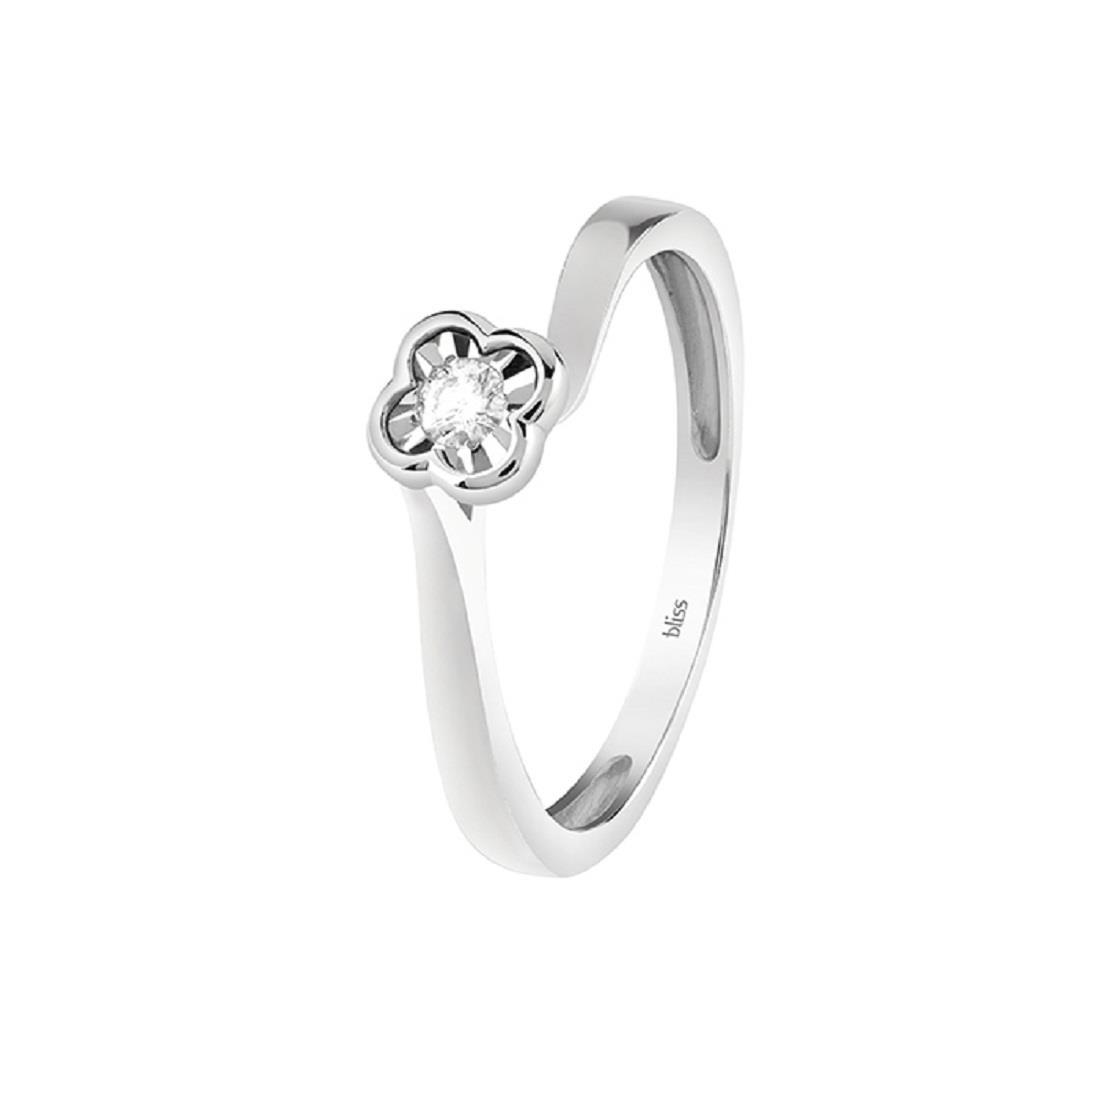 Flower ring with diamond - BLISS